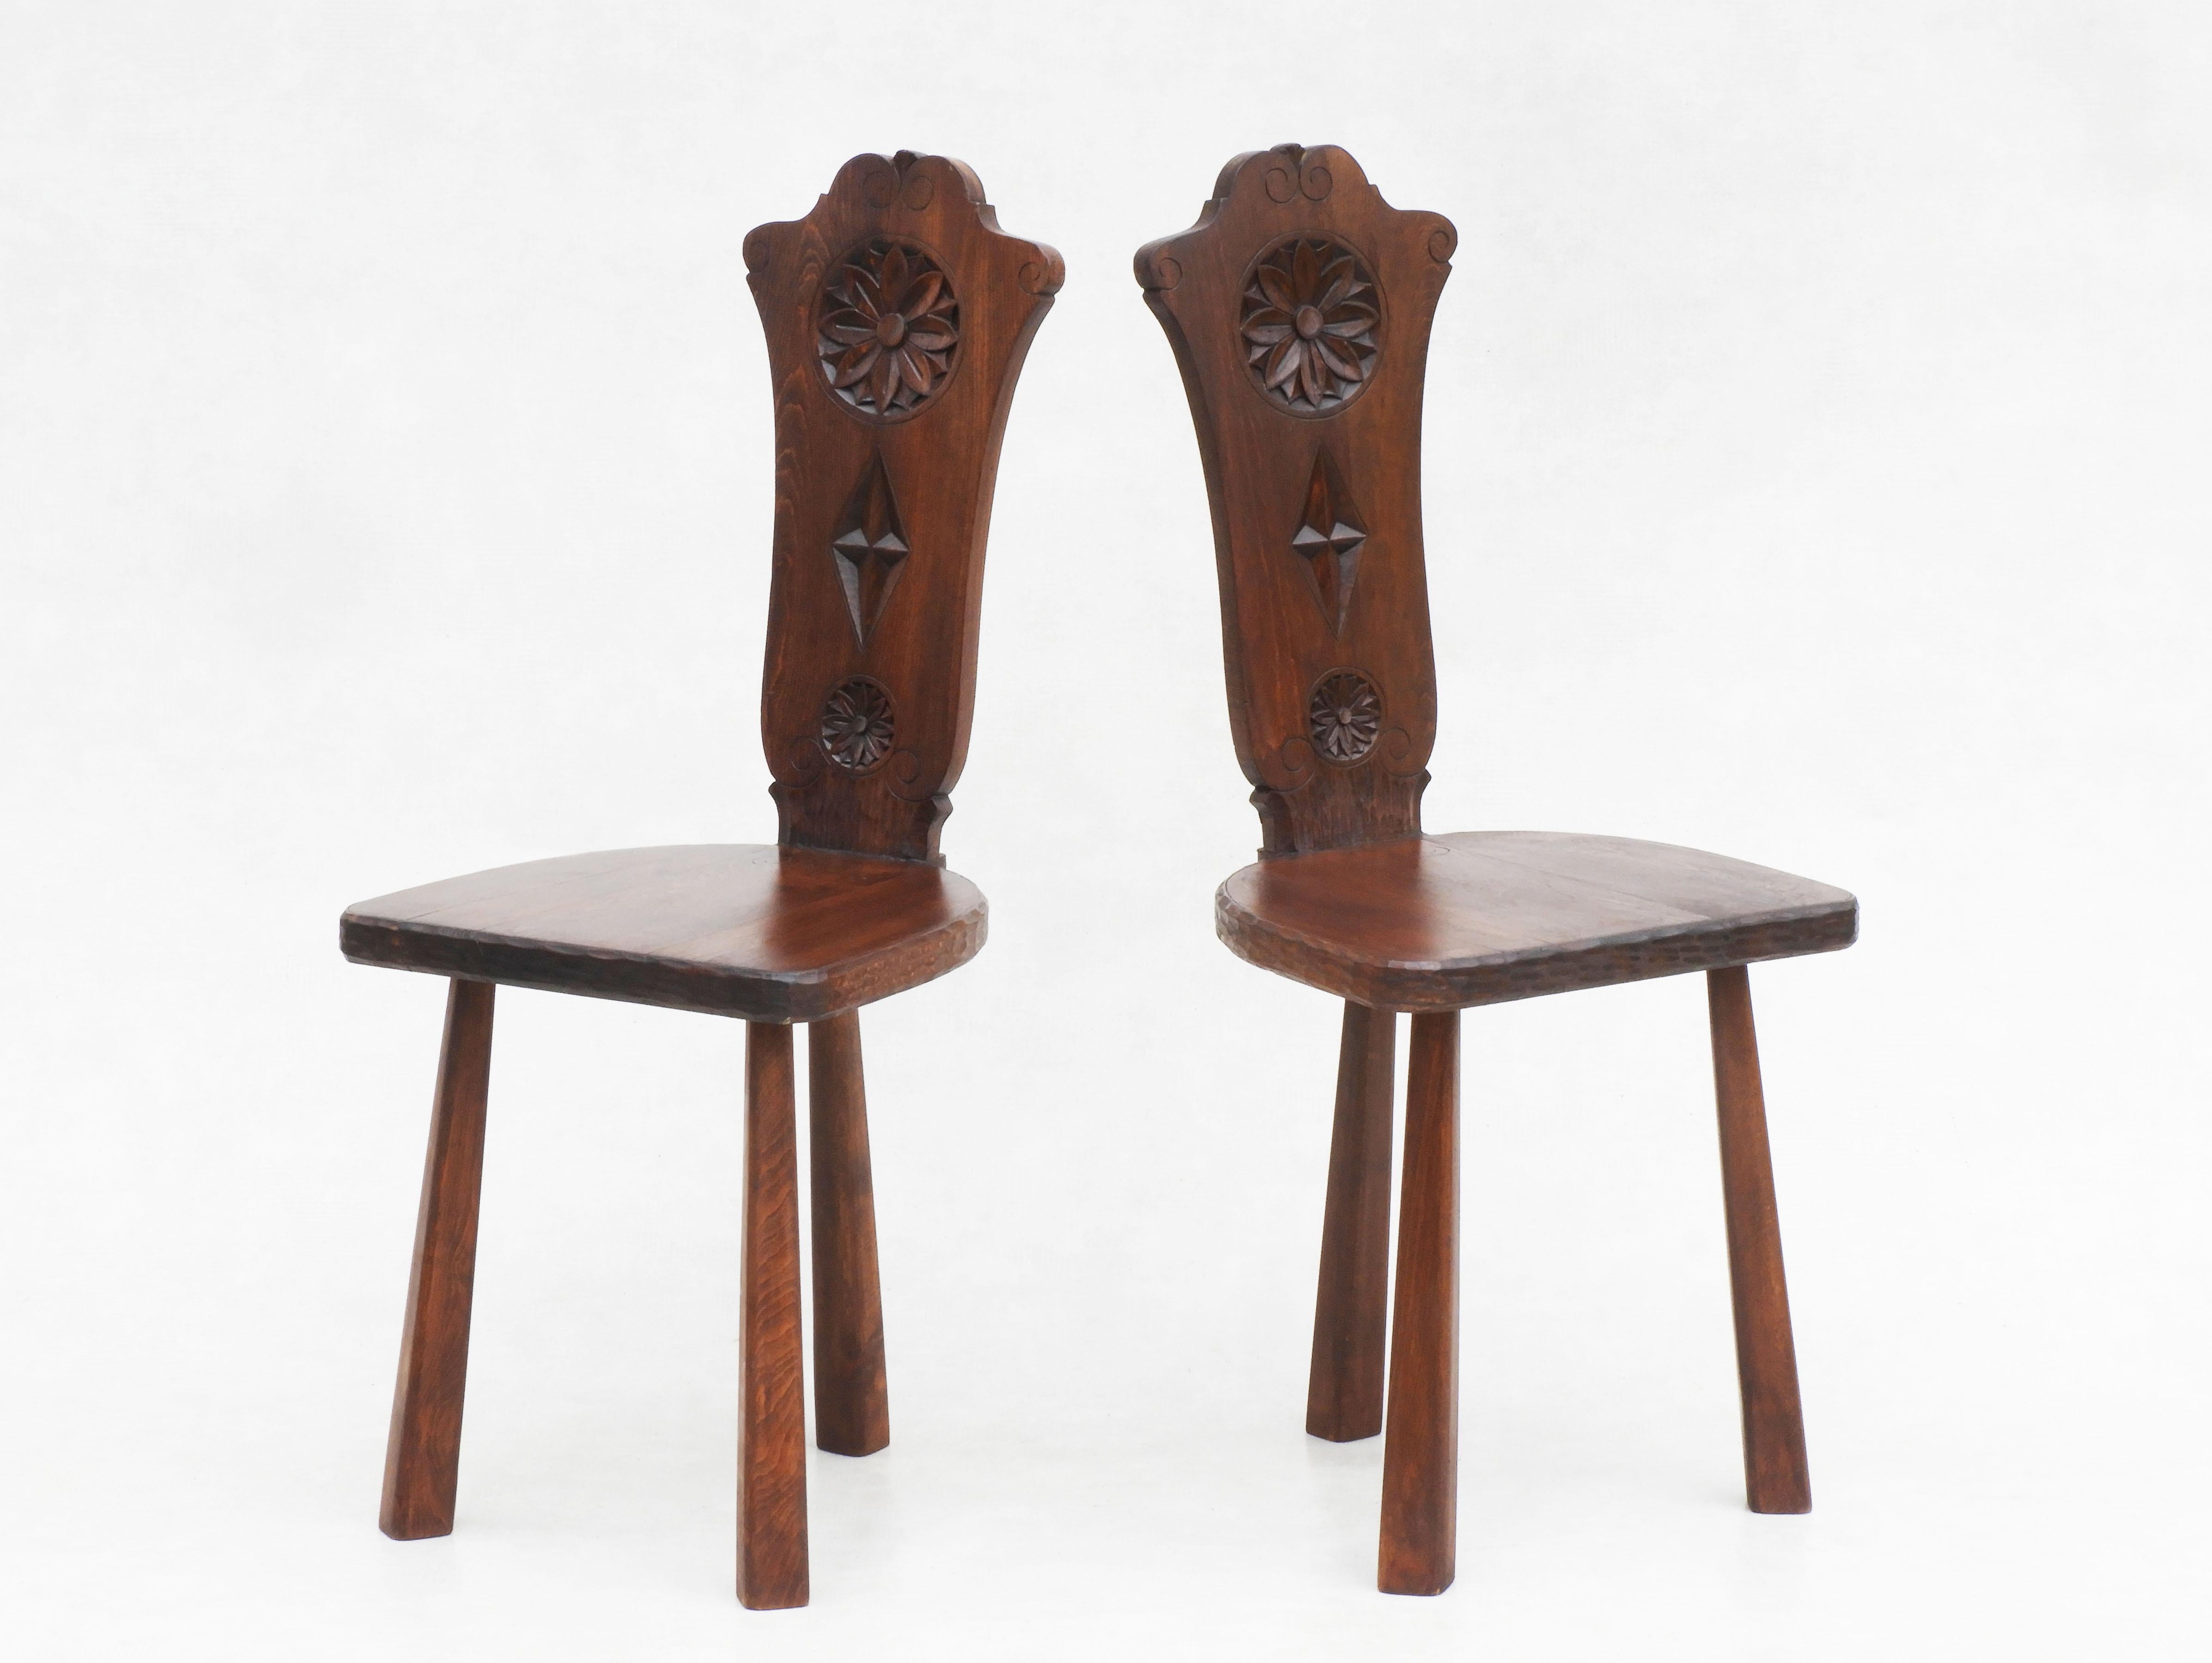 Pair of Basque Tripod Chairs 1950s European Folk Art In Good Condition For Sale In Trensacq, FR